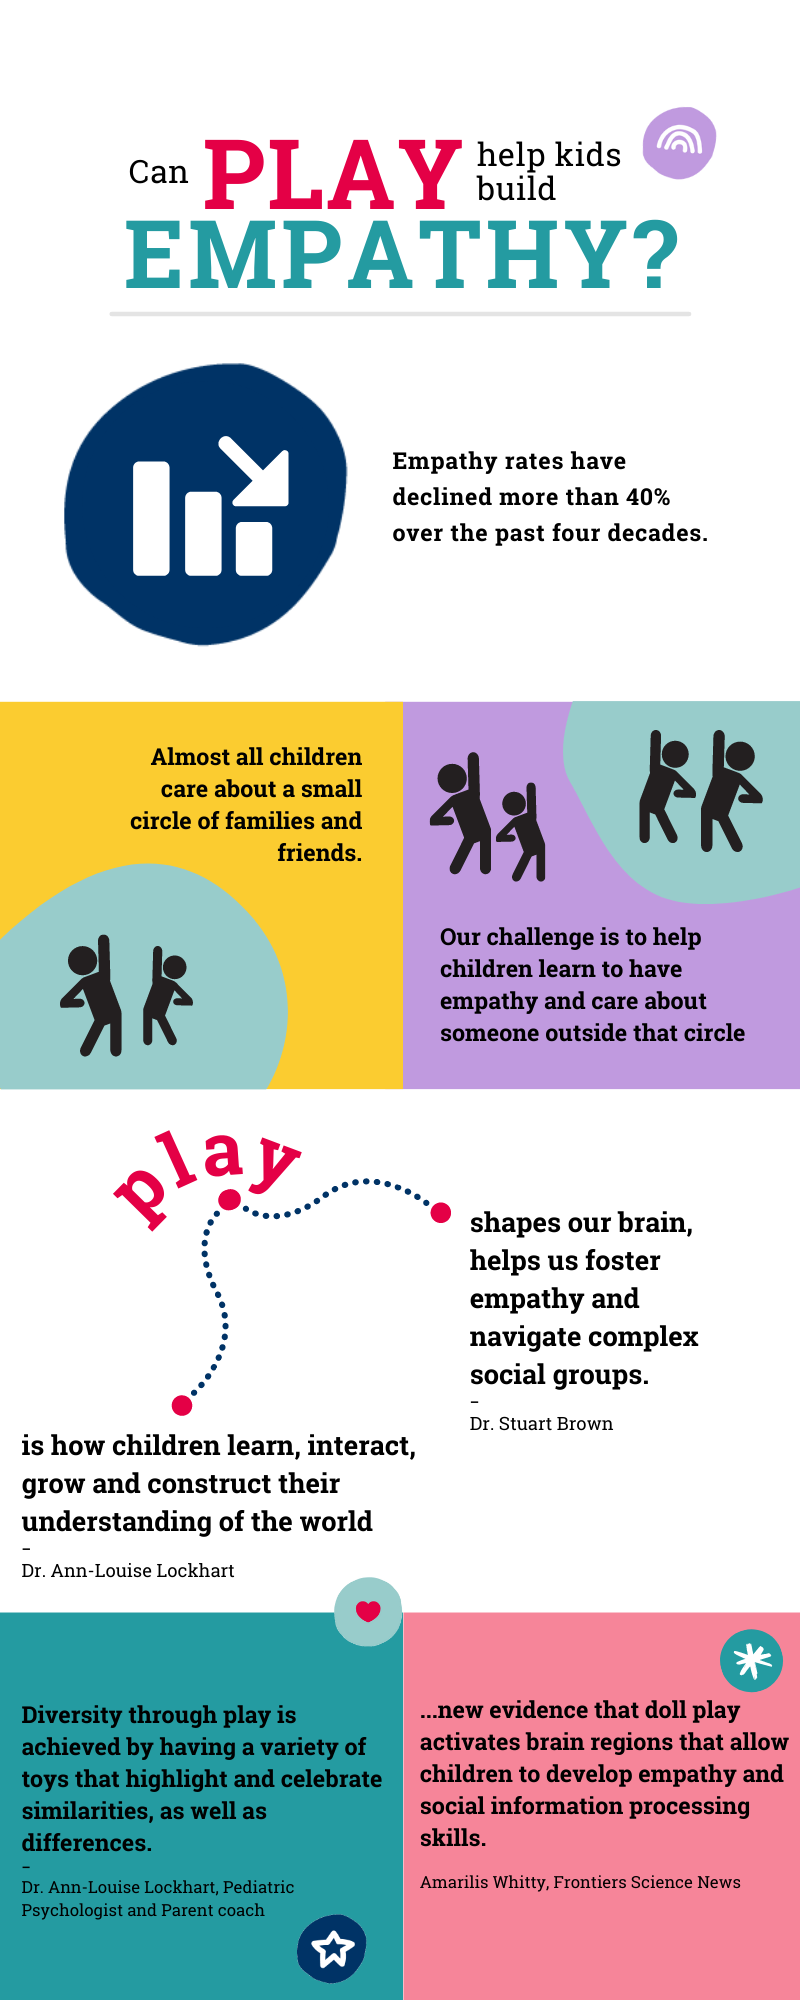 Can Play Help Kids Build Empathy? Infographic from For Purpose Kids